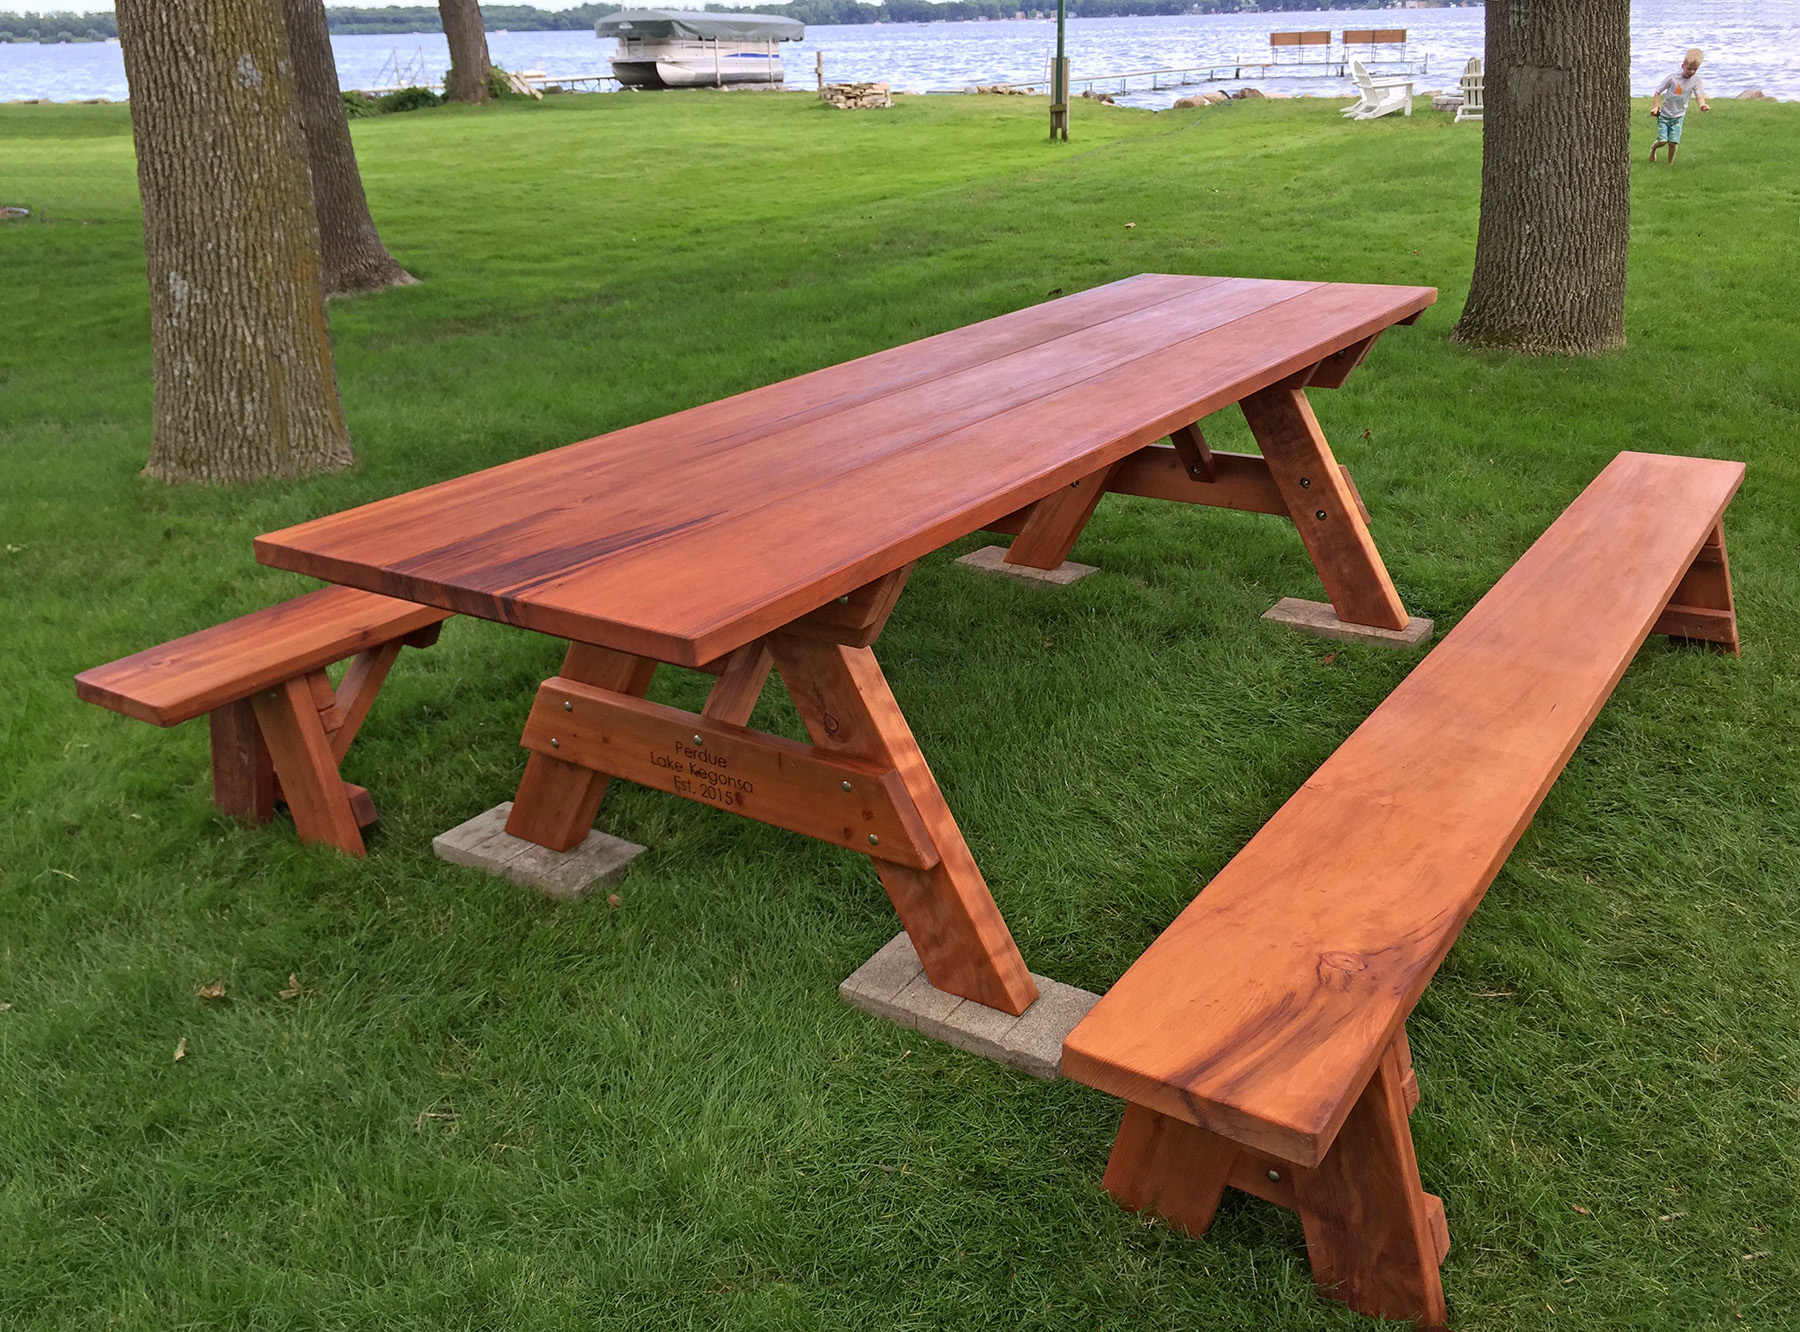 The Showstopping Picnic Table Upgrade You Need To DIY Before Summer Hits